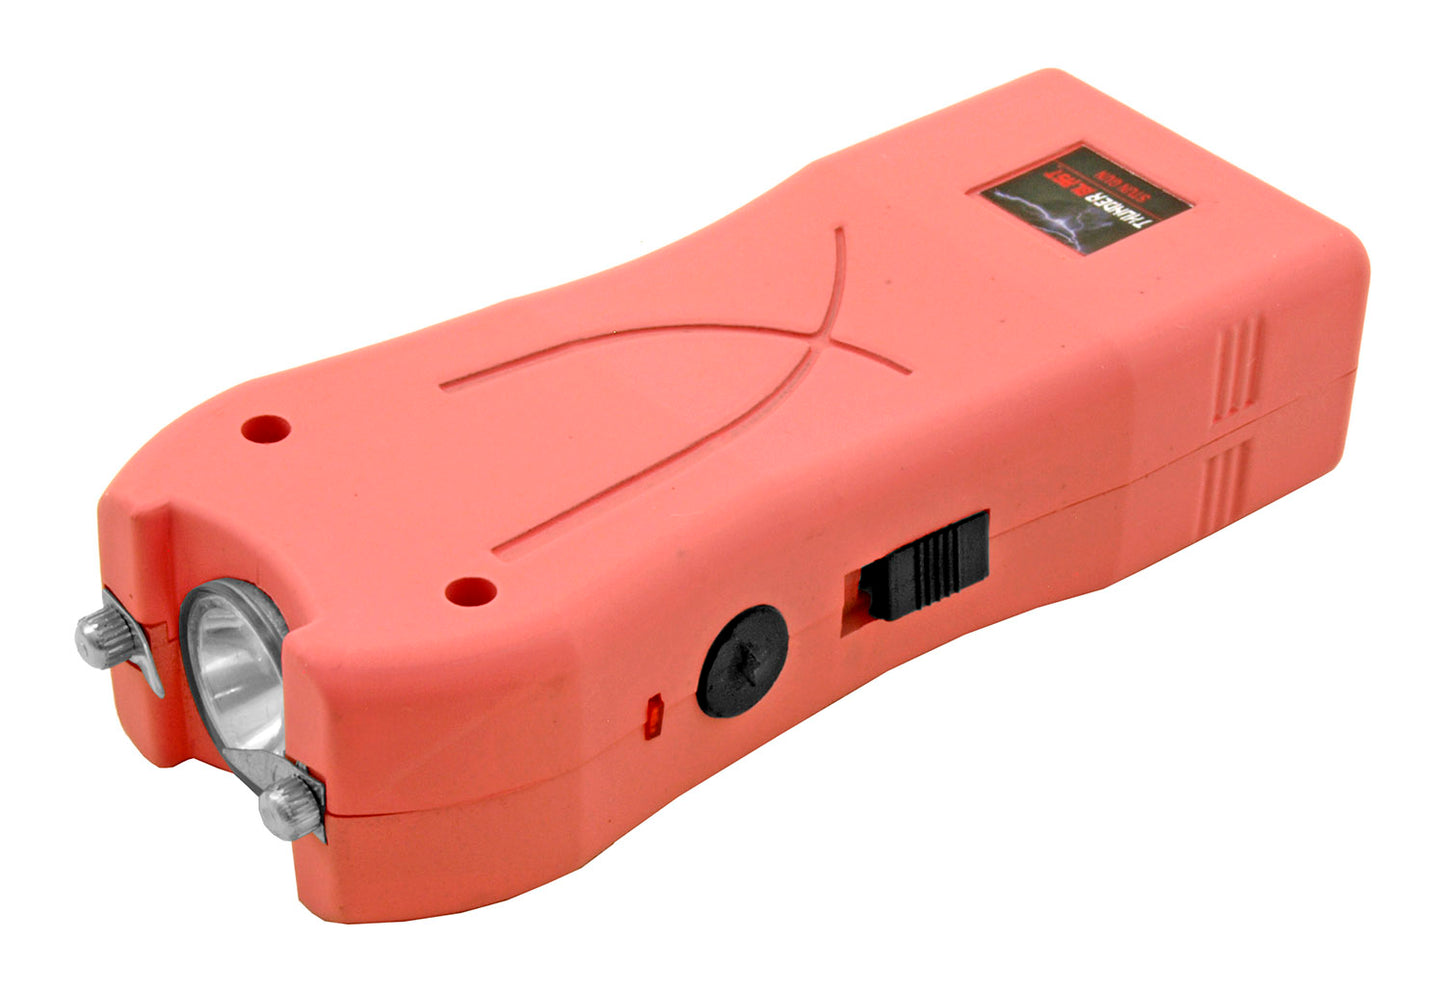 HIgh Voltage Compact Rechargeable Stun Gun with Flashlight (multiple colors)